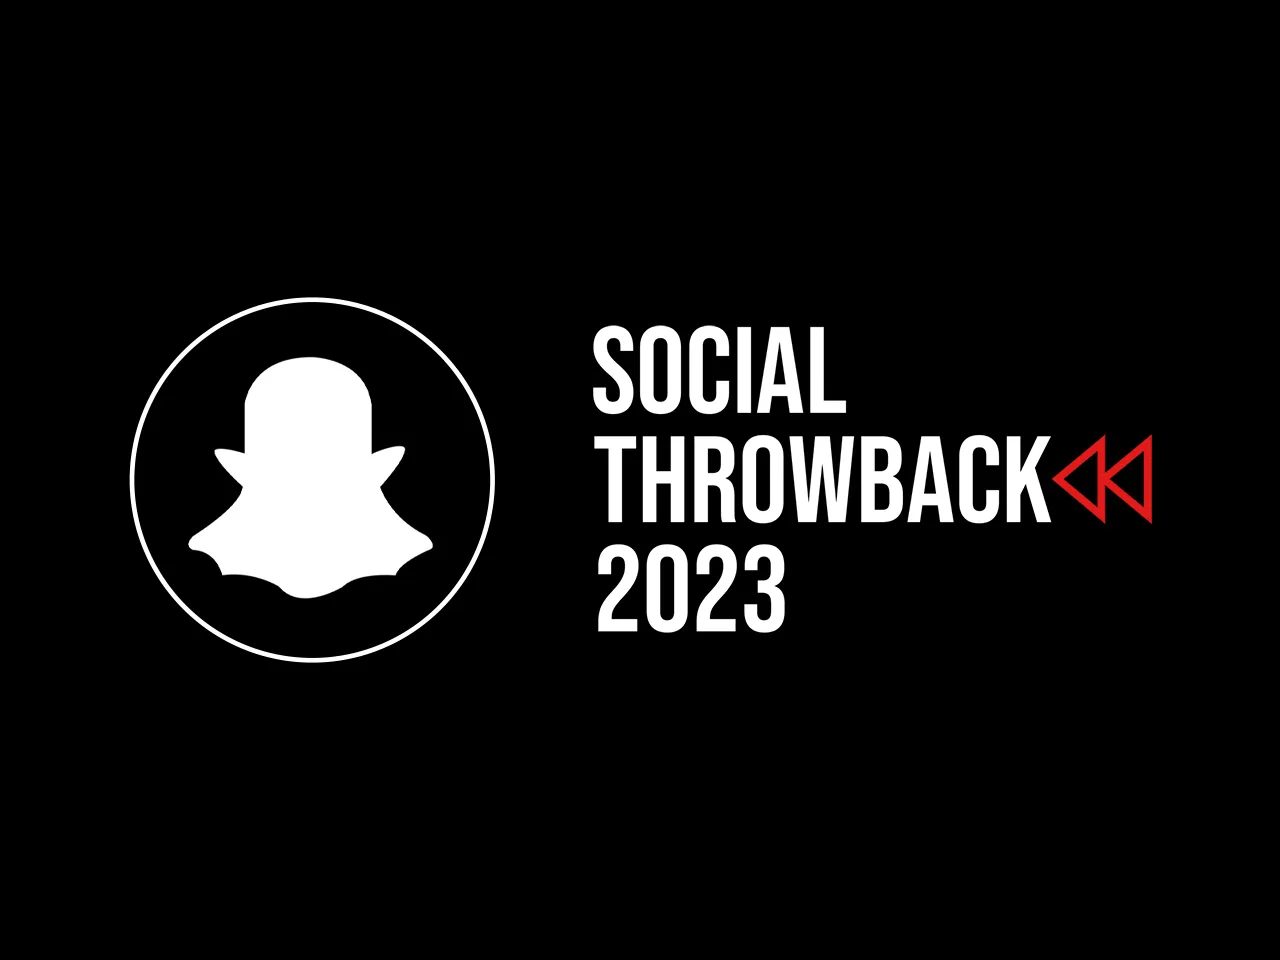 Social Throwback 2023: Snapchat updates in a glance